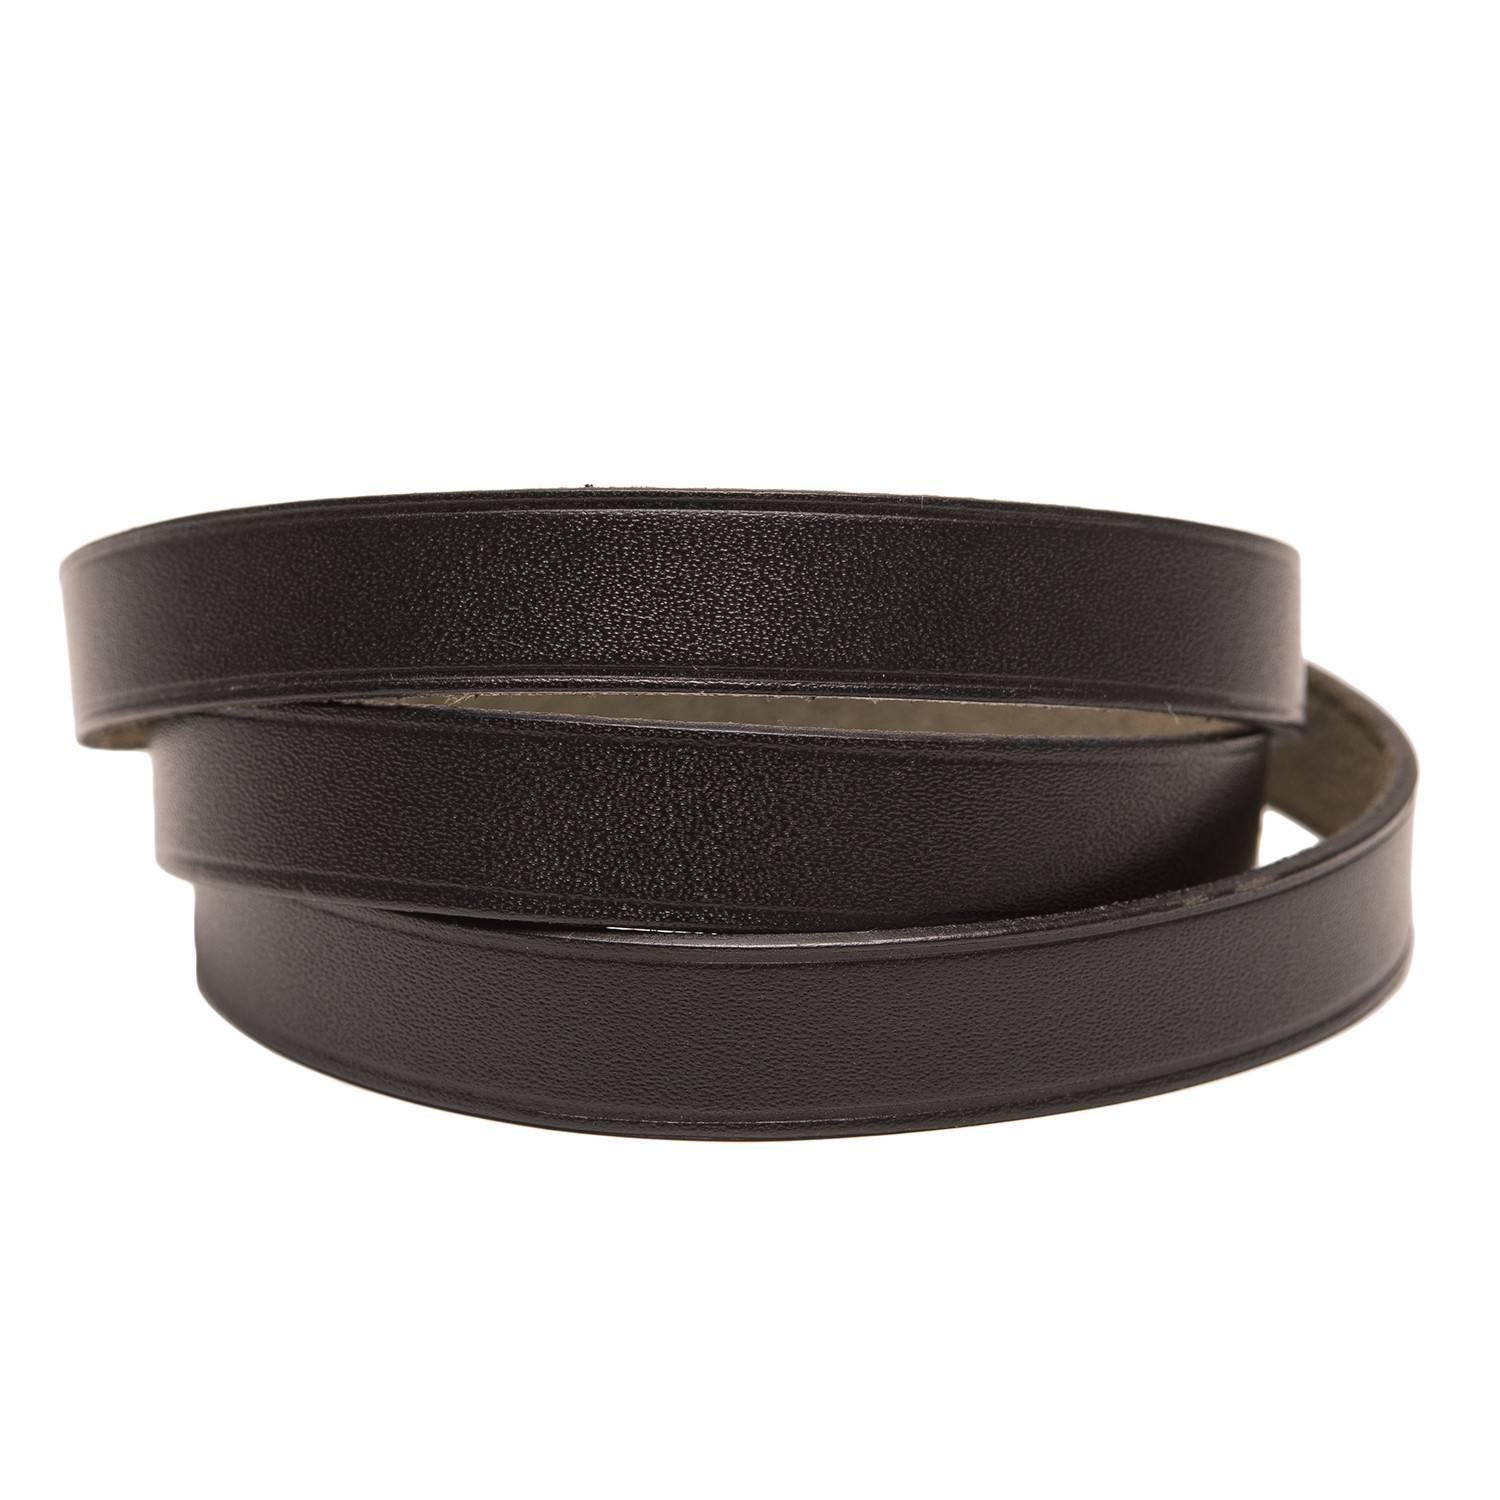 Hermes Black Calfskin Leather Quadruple Wrap Bracelet In Excellent Condition For Sale In New York, NY